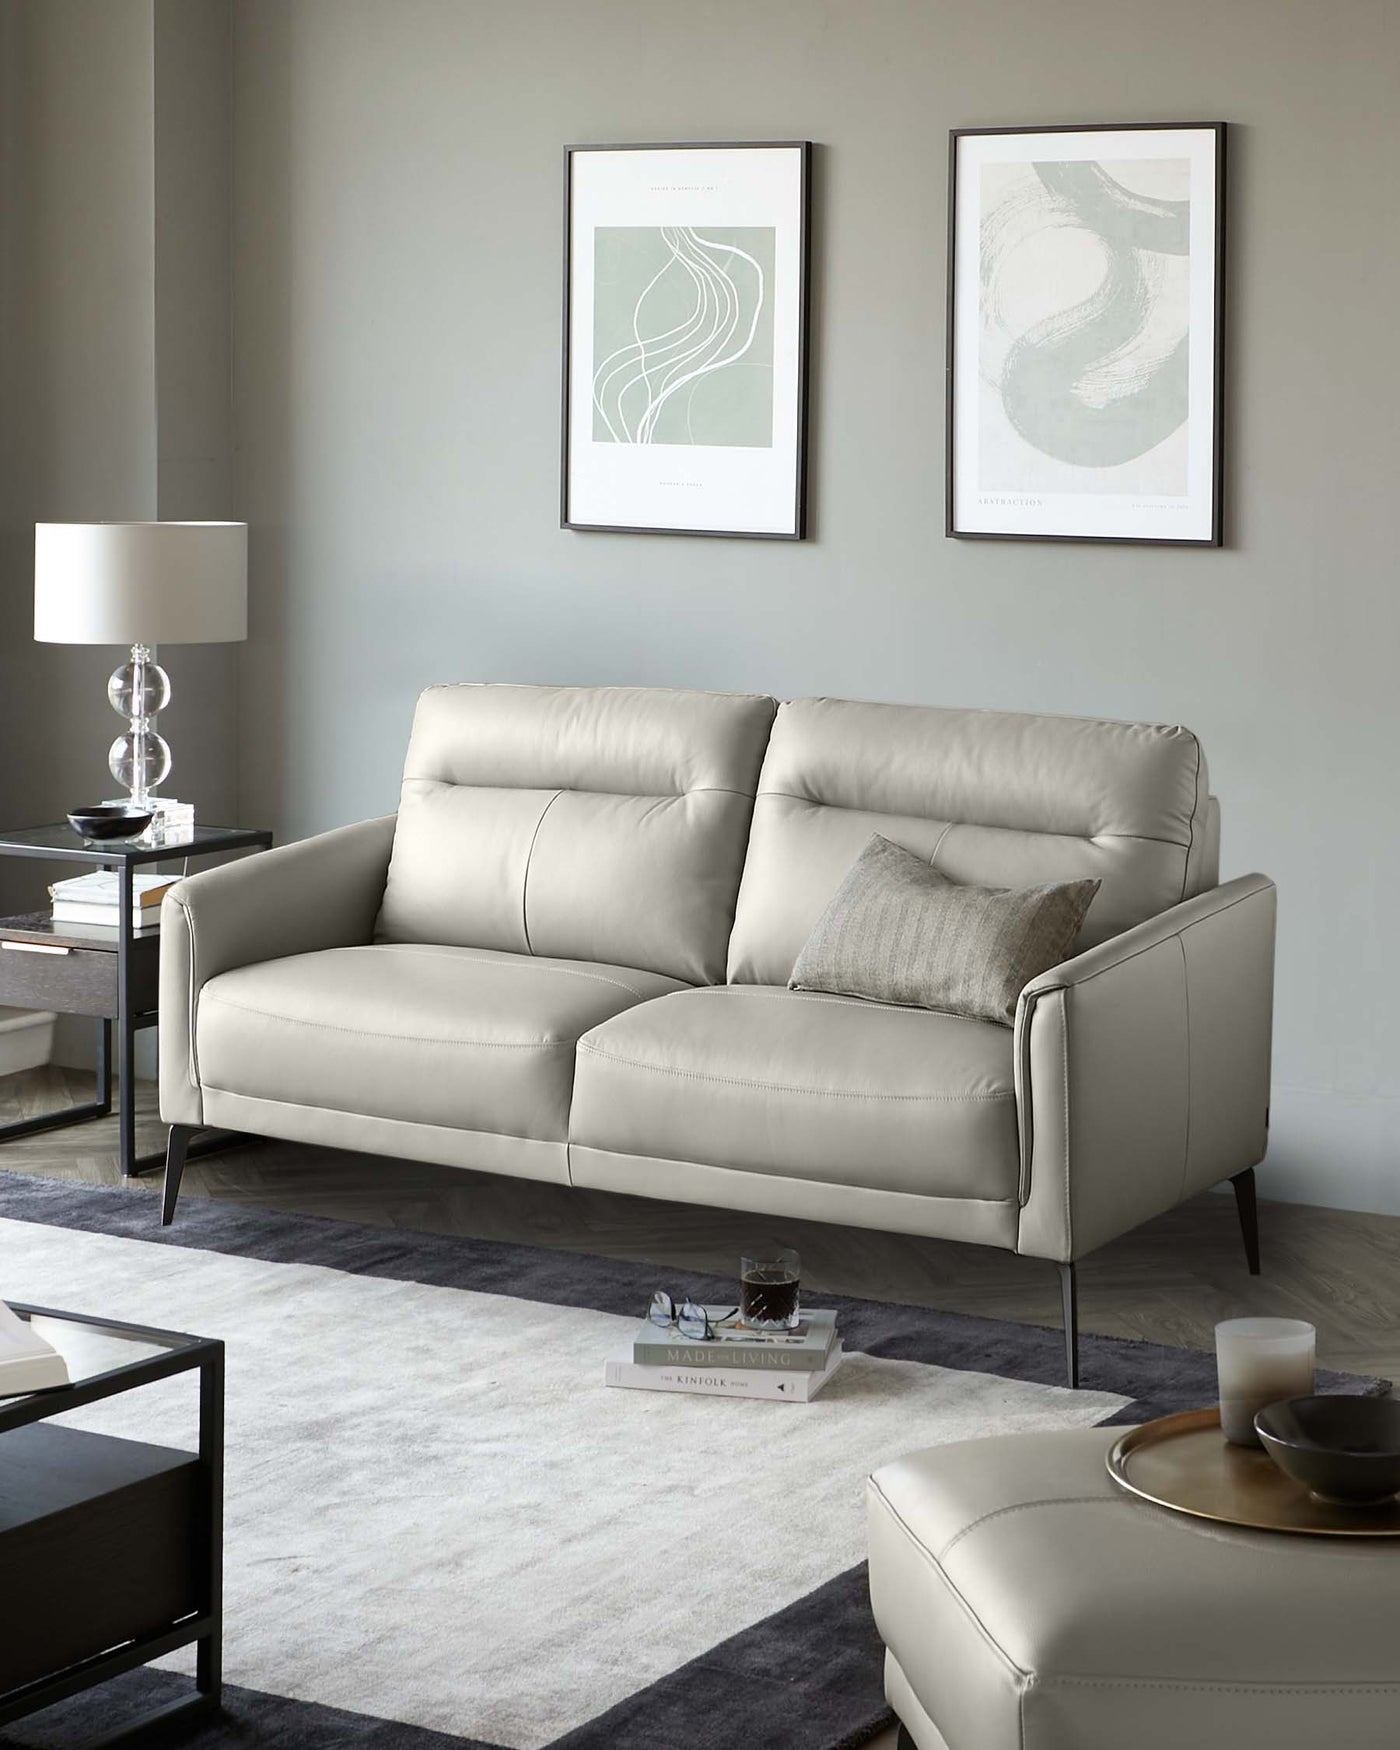 Modern light grey leather three-seater sofa with minimalistic design and clean lines, accompanied by a matching leather ottoman. A sleek side table with a glass top and dark frame stands adjacent to the sofa, supporting a chic table lamp. The neutral-toned area rug beneath complements the contemporary styling, framed by a dark wood coffee table with a reflective glass surface and minimal decor.